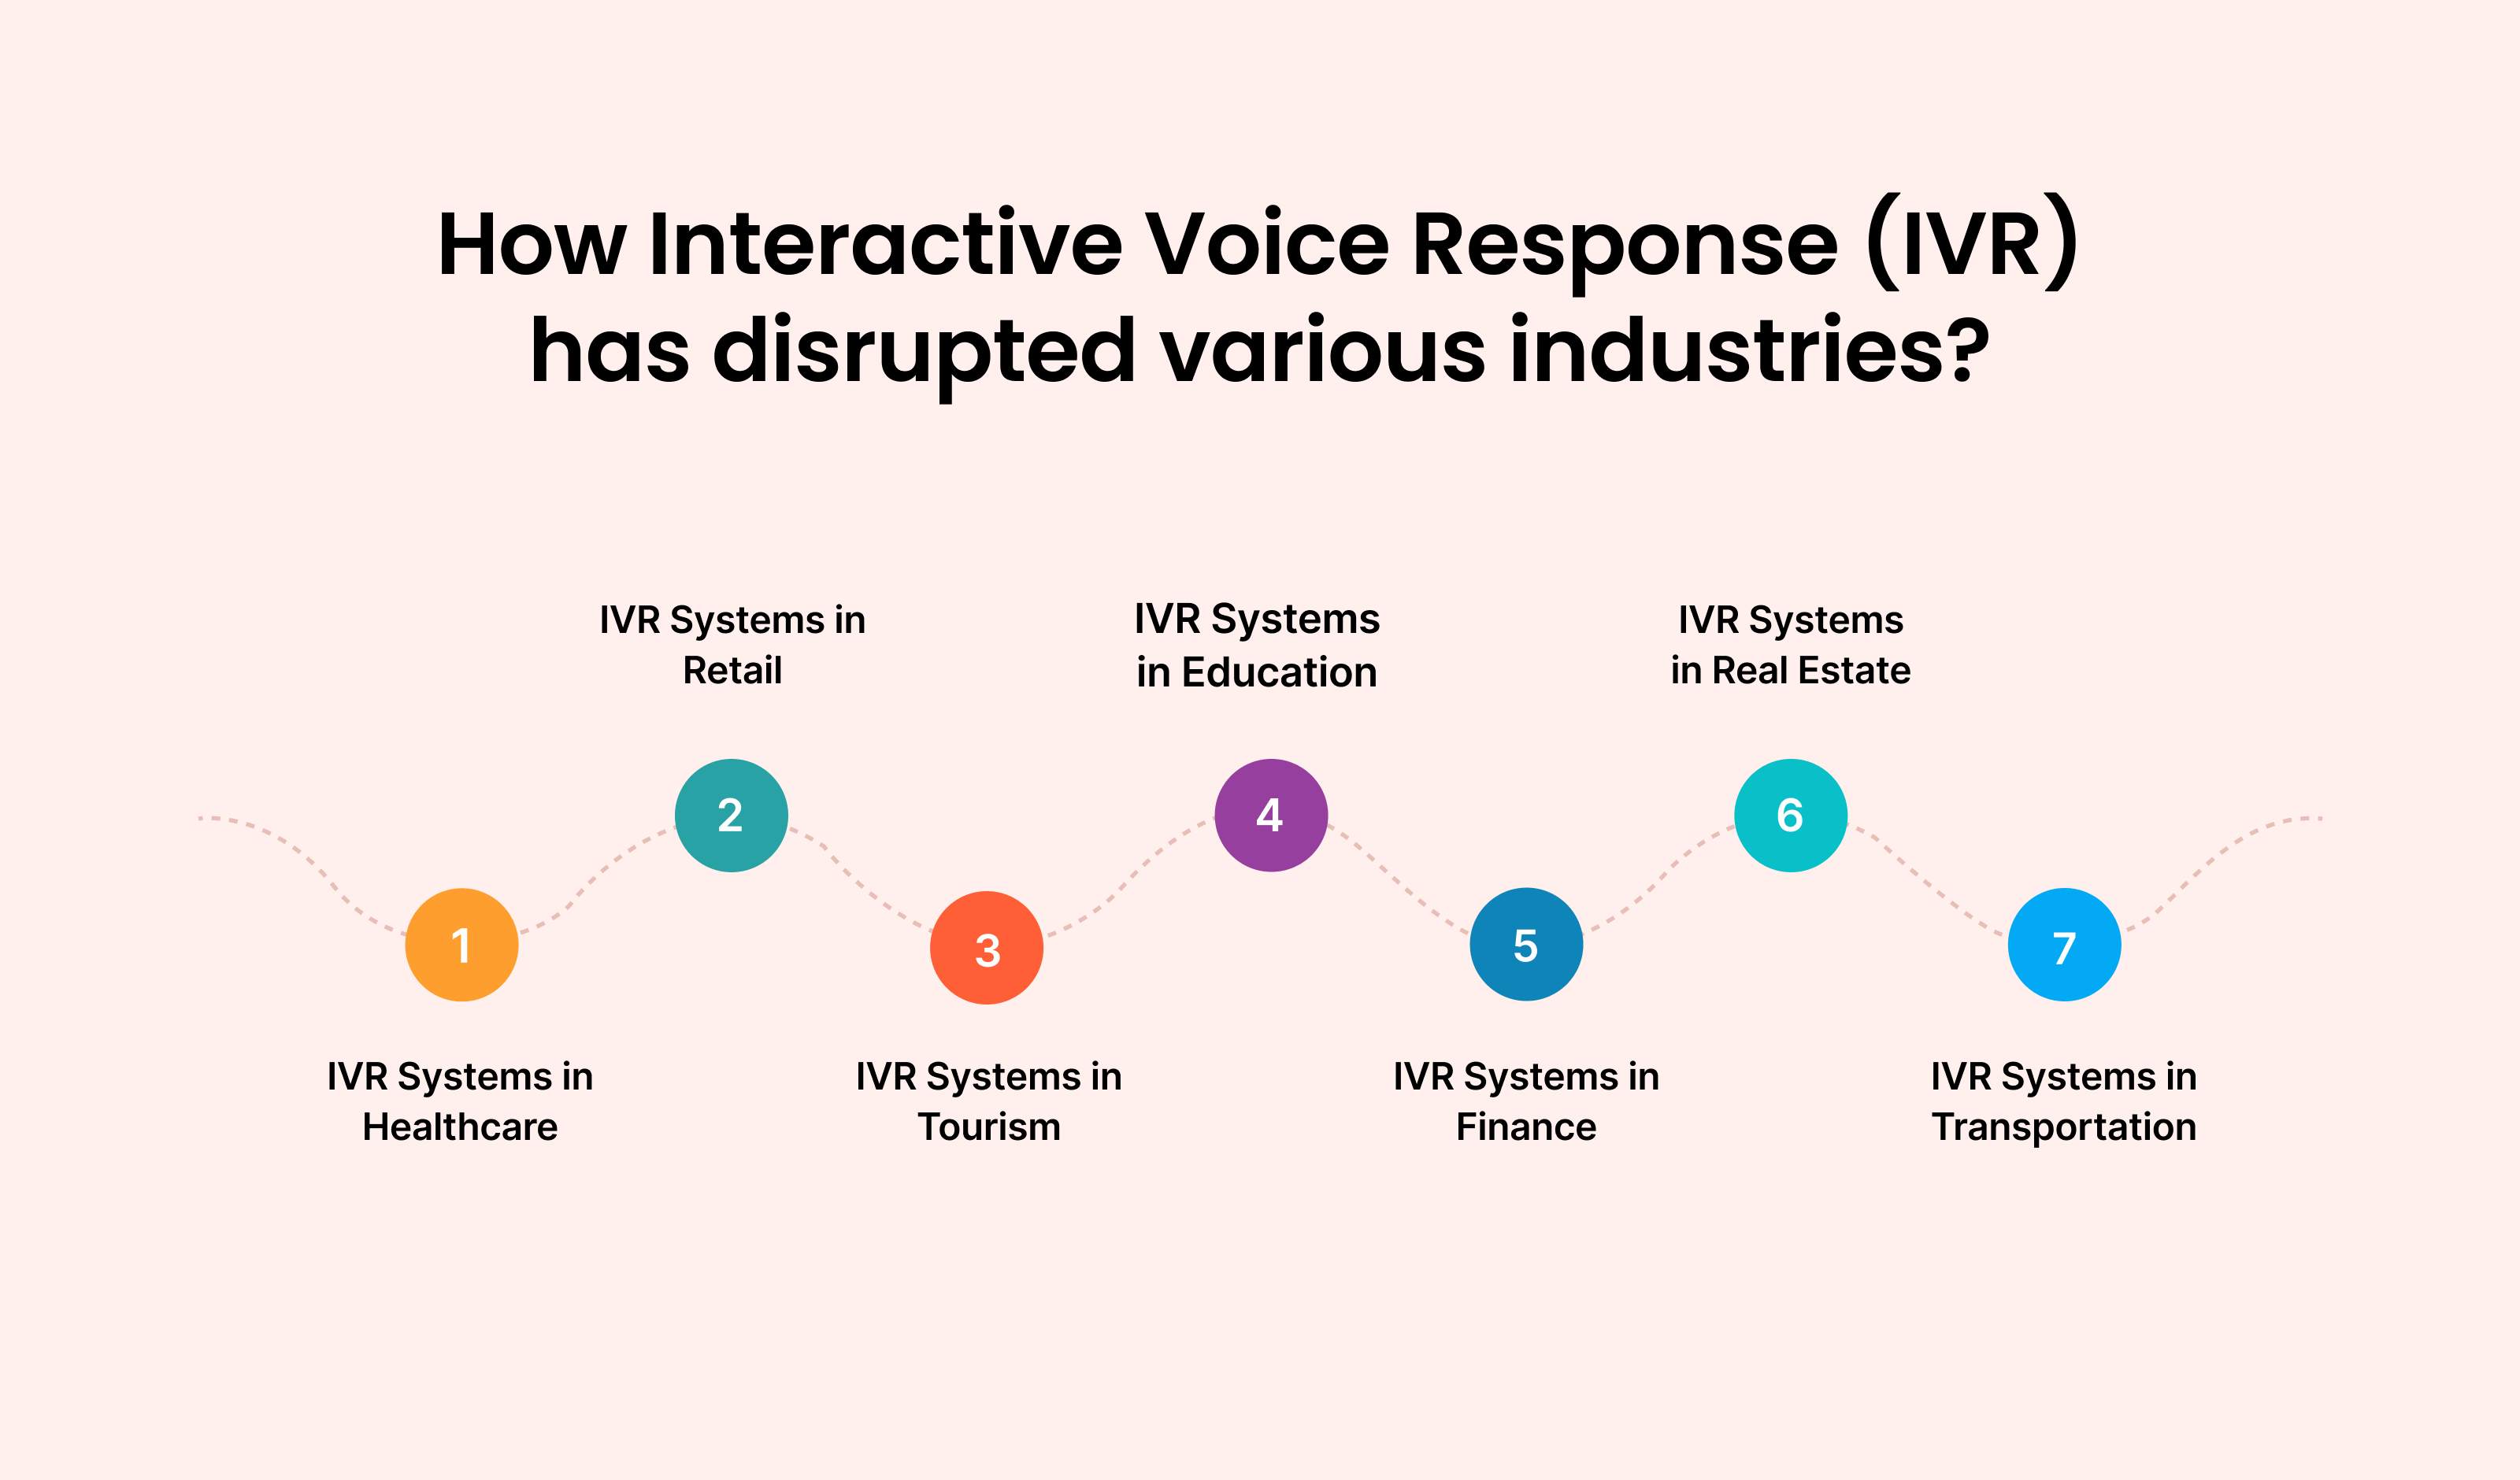 How Interactive Voice Response (IVR) has disrupted various industries?